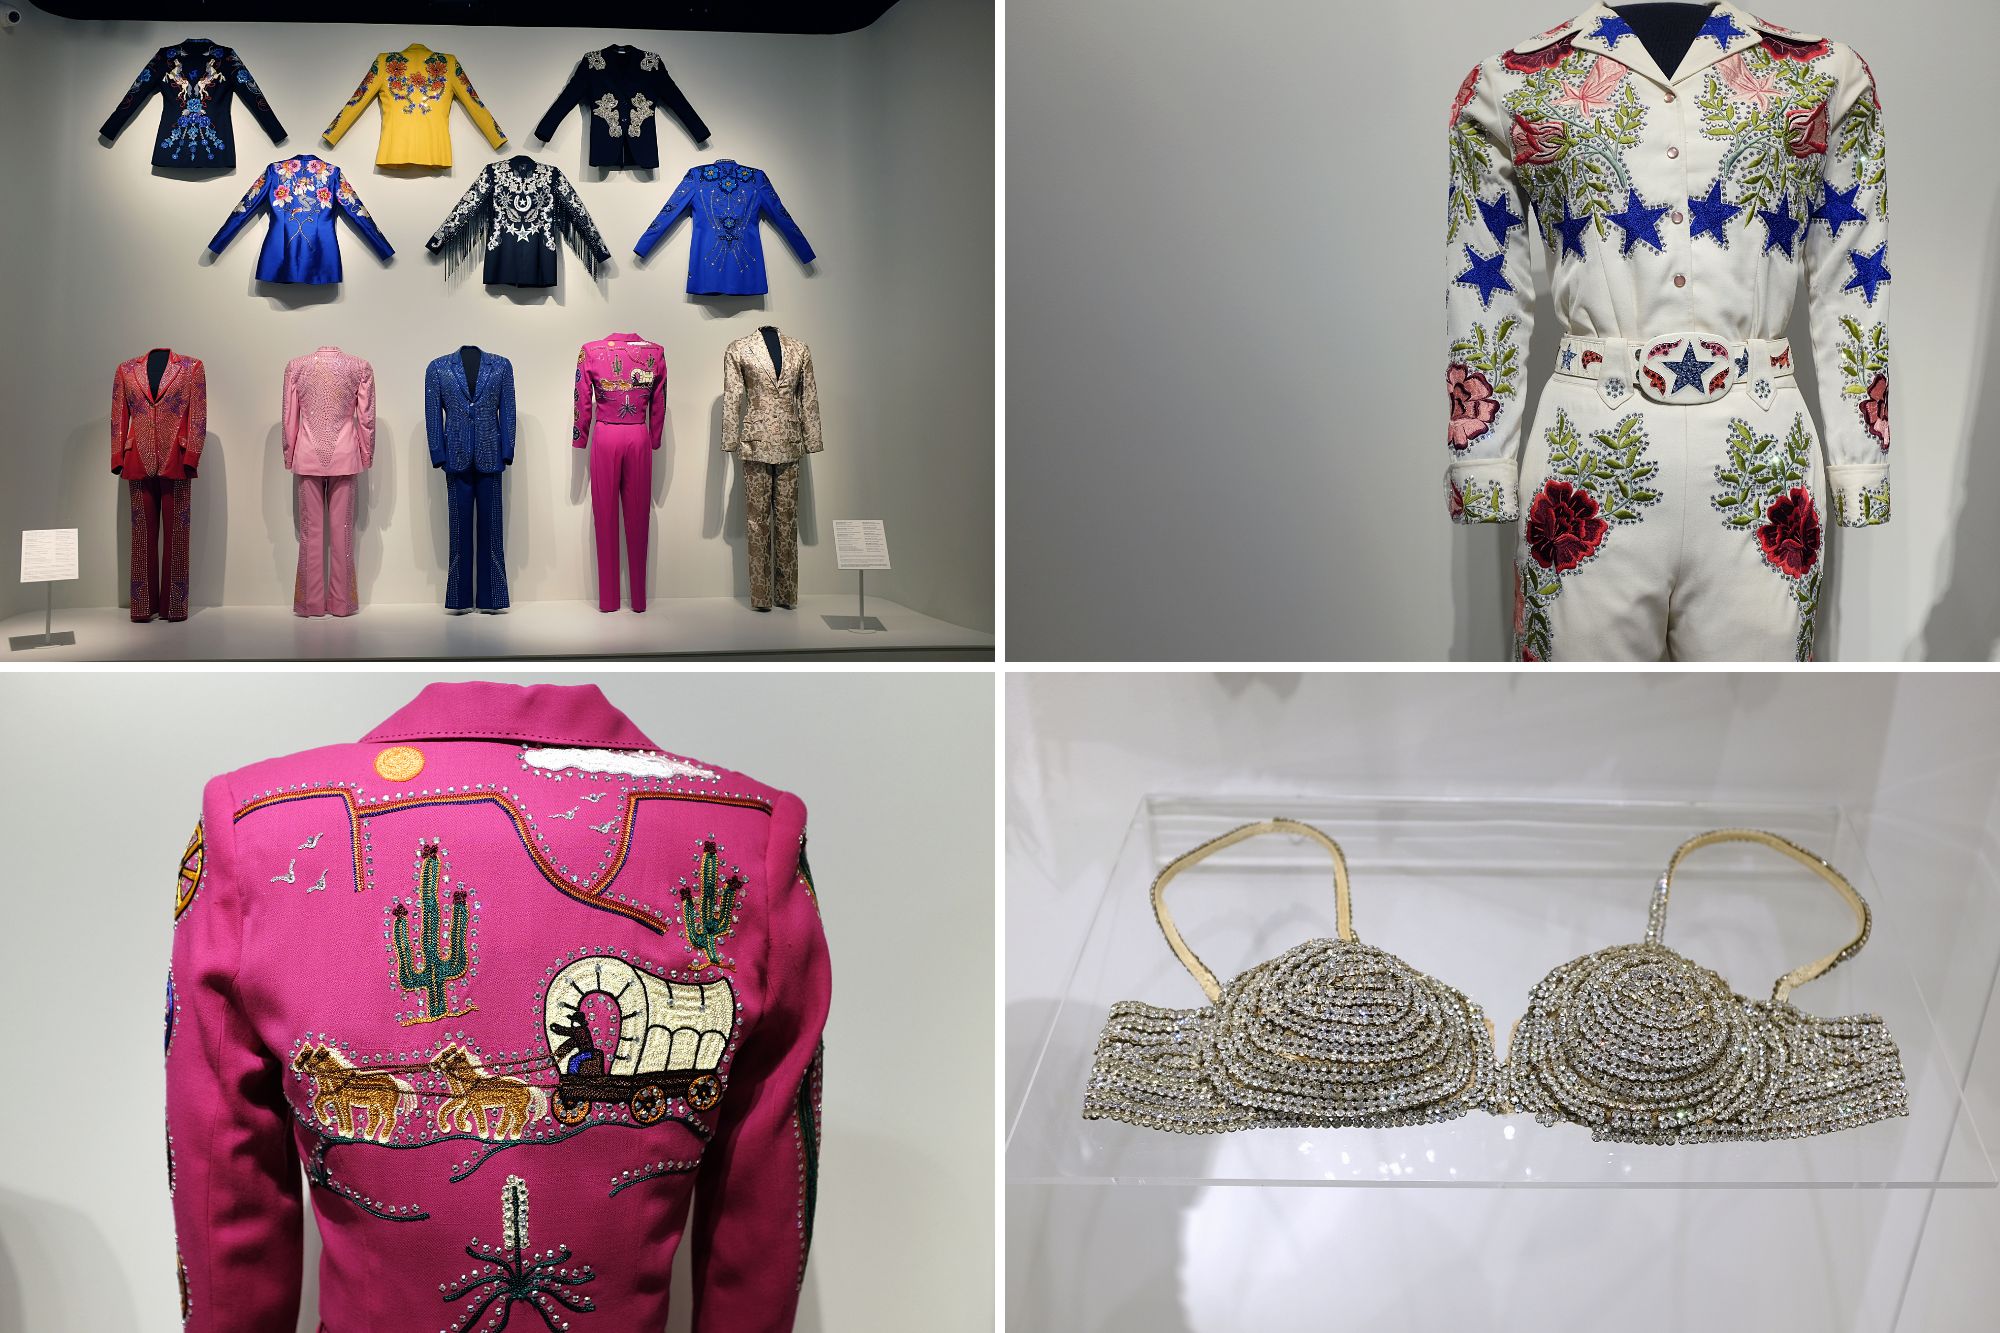 Items in the Dare to Wear exhibit at the National Cowgirl Museum